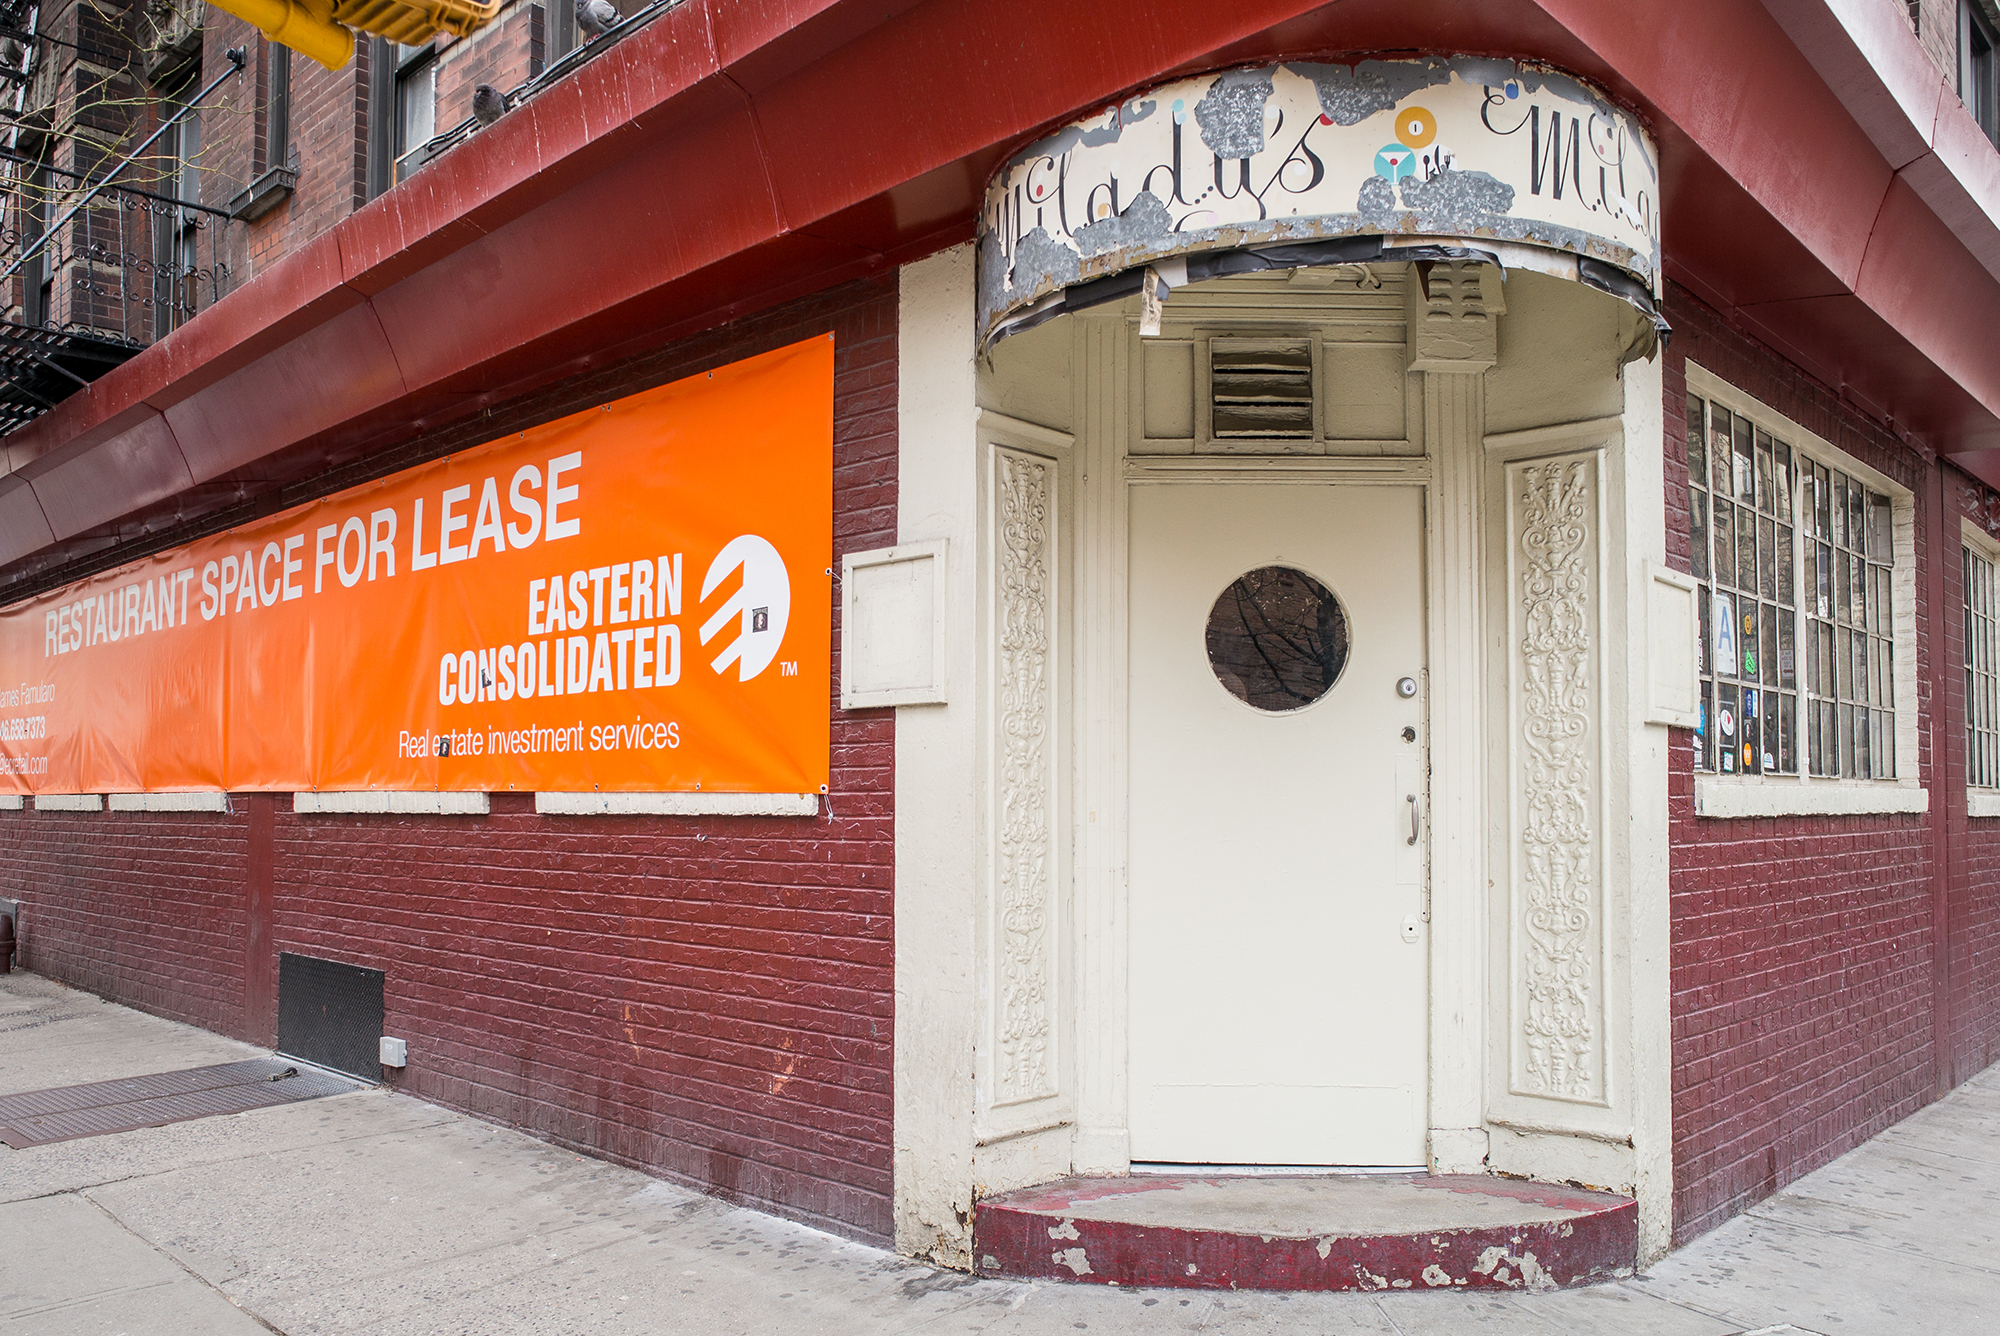 [The long vacant Milday's space in Soho]